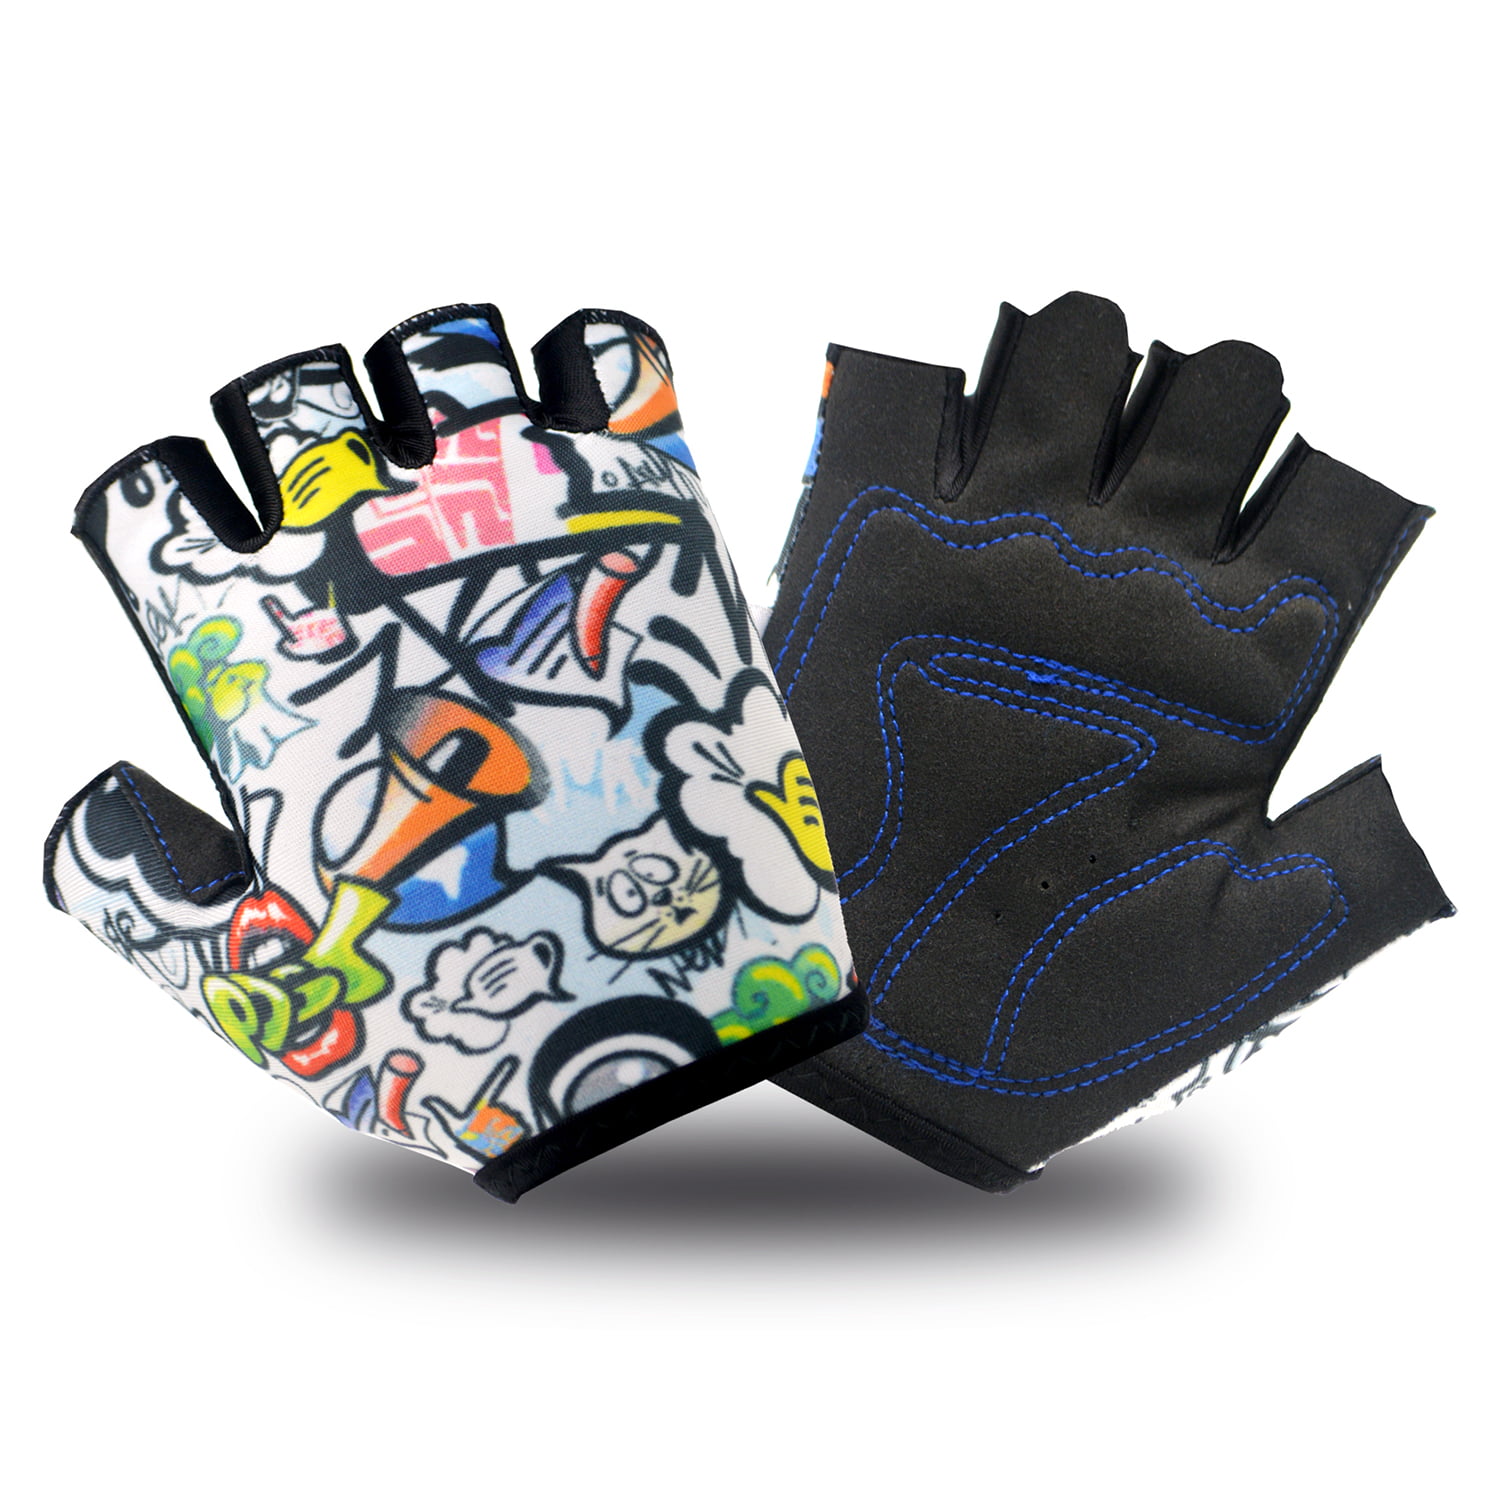 Details about   Kids Children Bike Cycling Half Finger Gloves Boys & Girls Sports Bicycle Riding